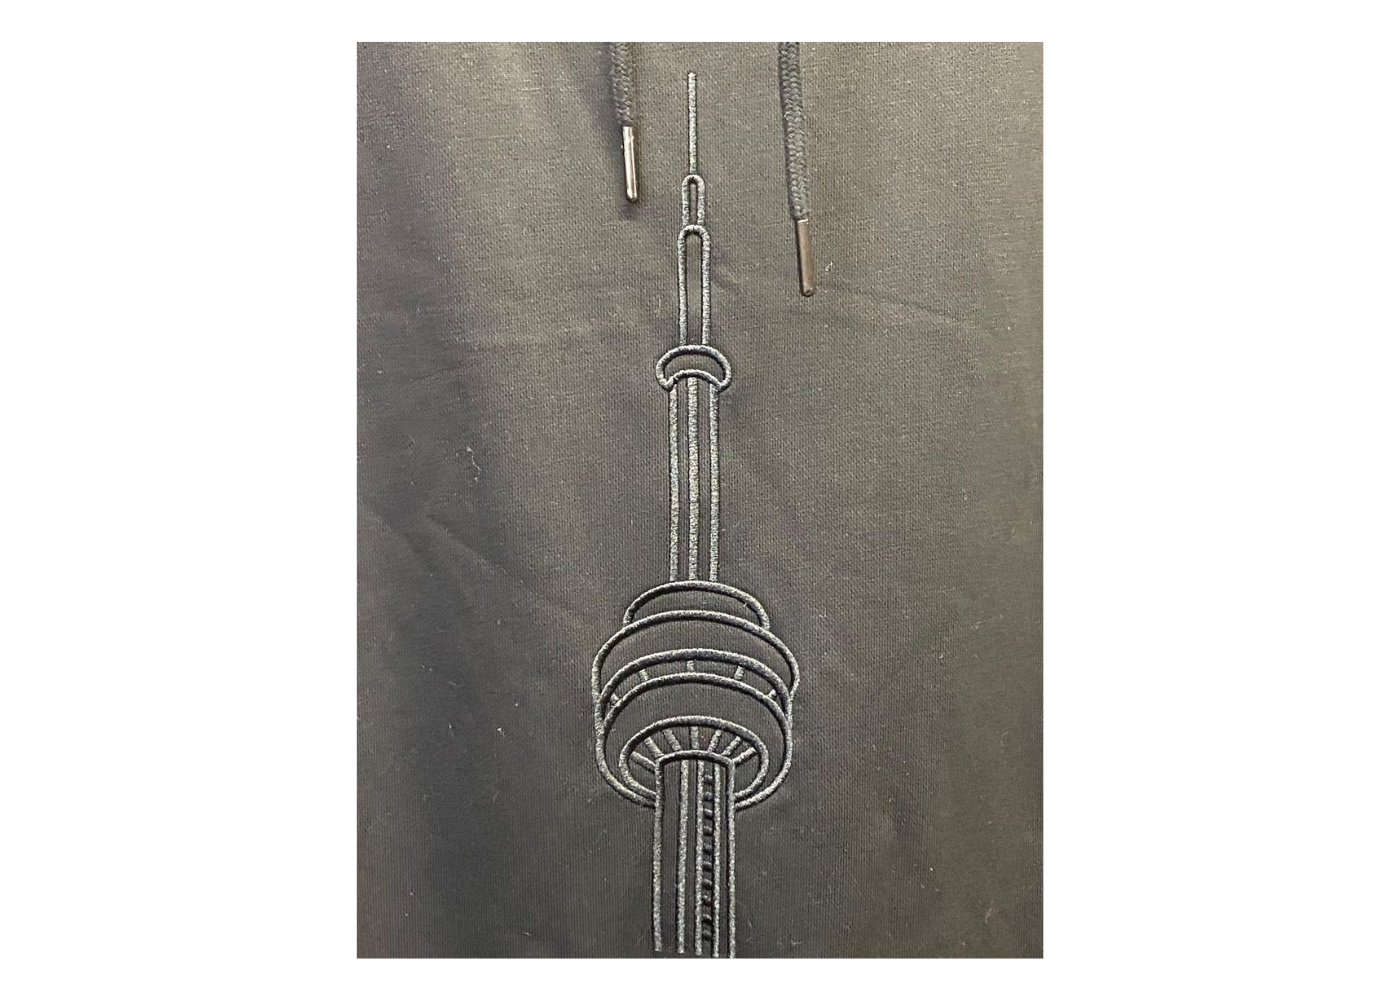 ON MY GRIND "CN Tower" Black Sweater